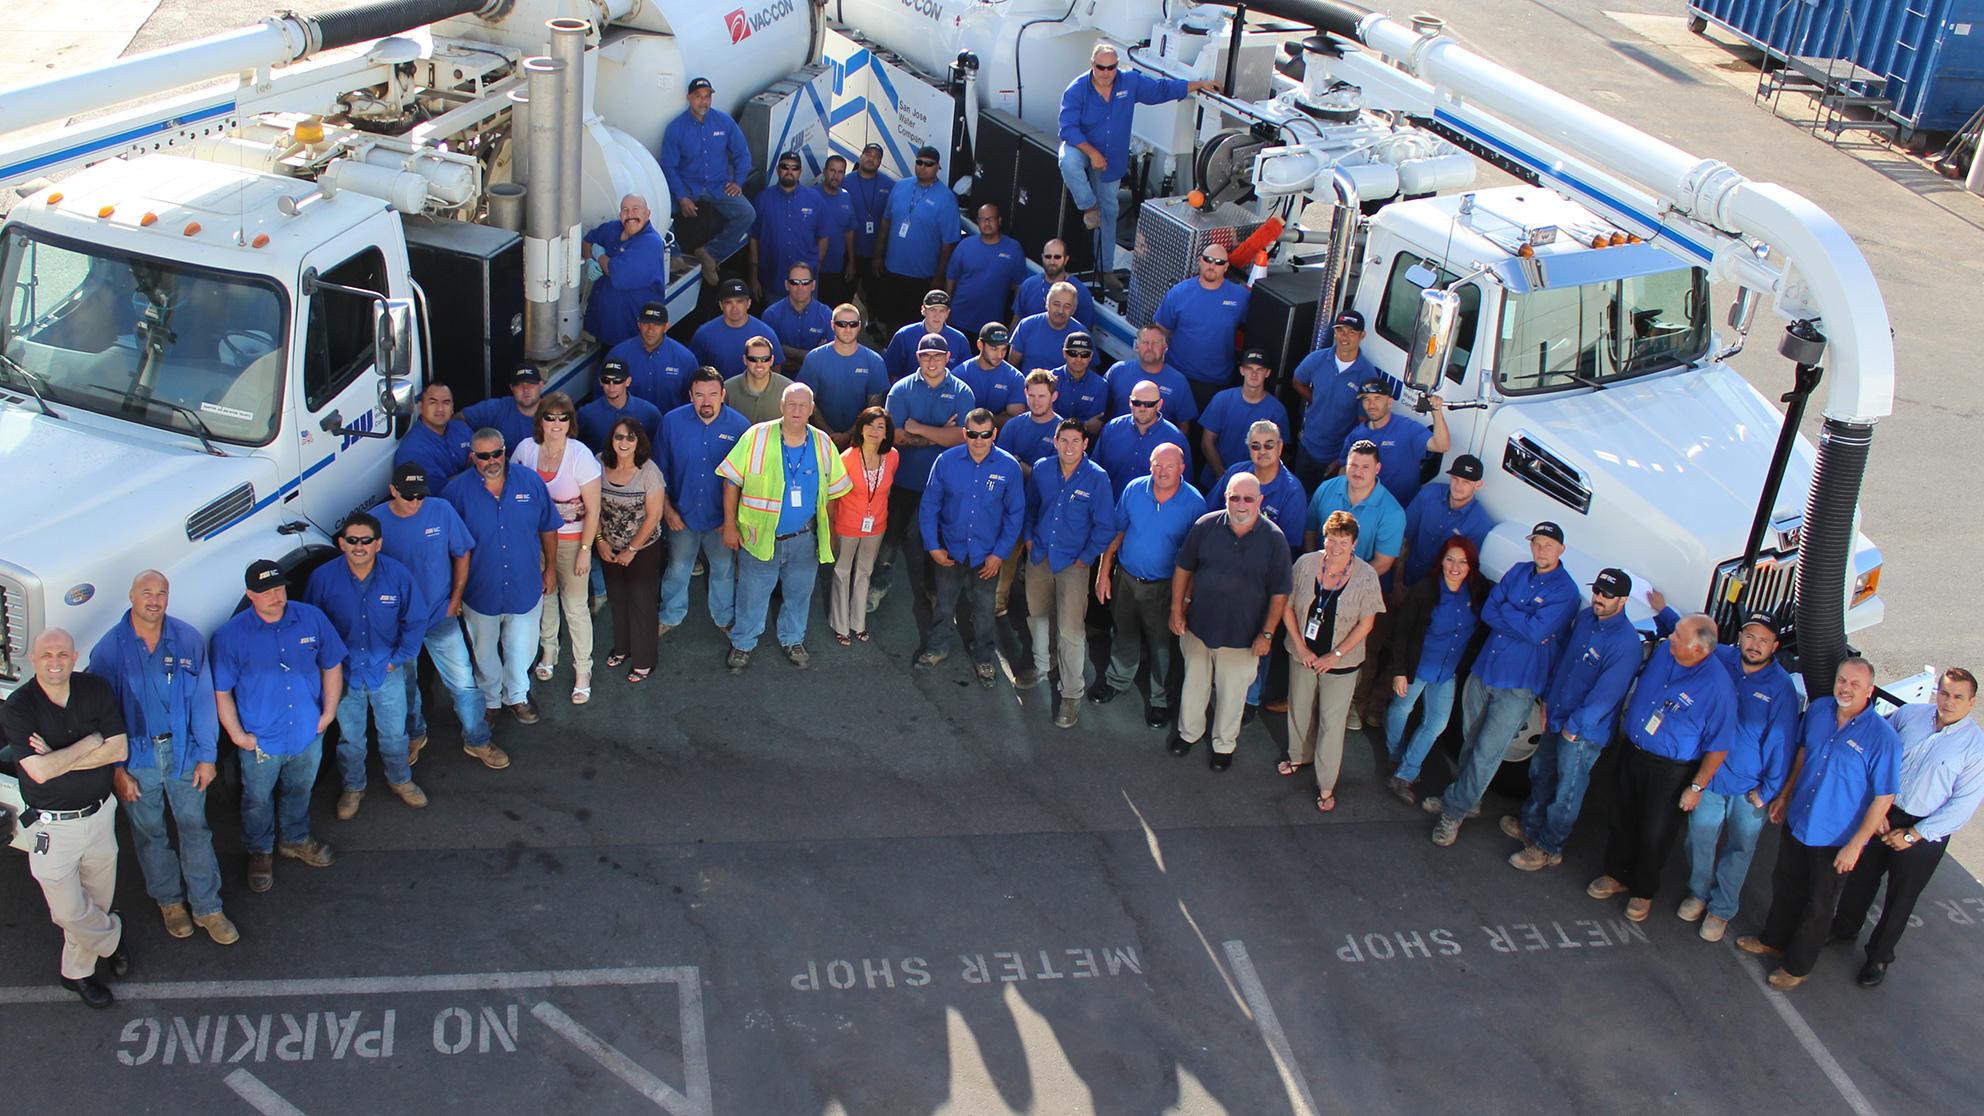 Diverse San Jose Water employees stand outside together